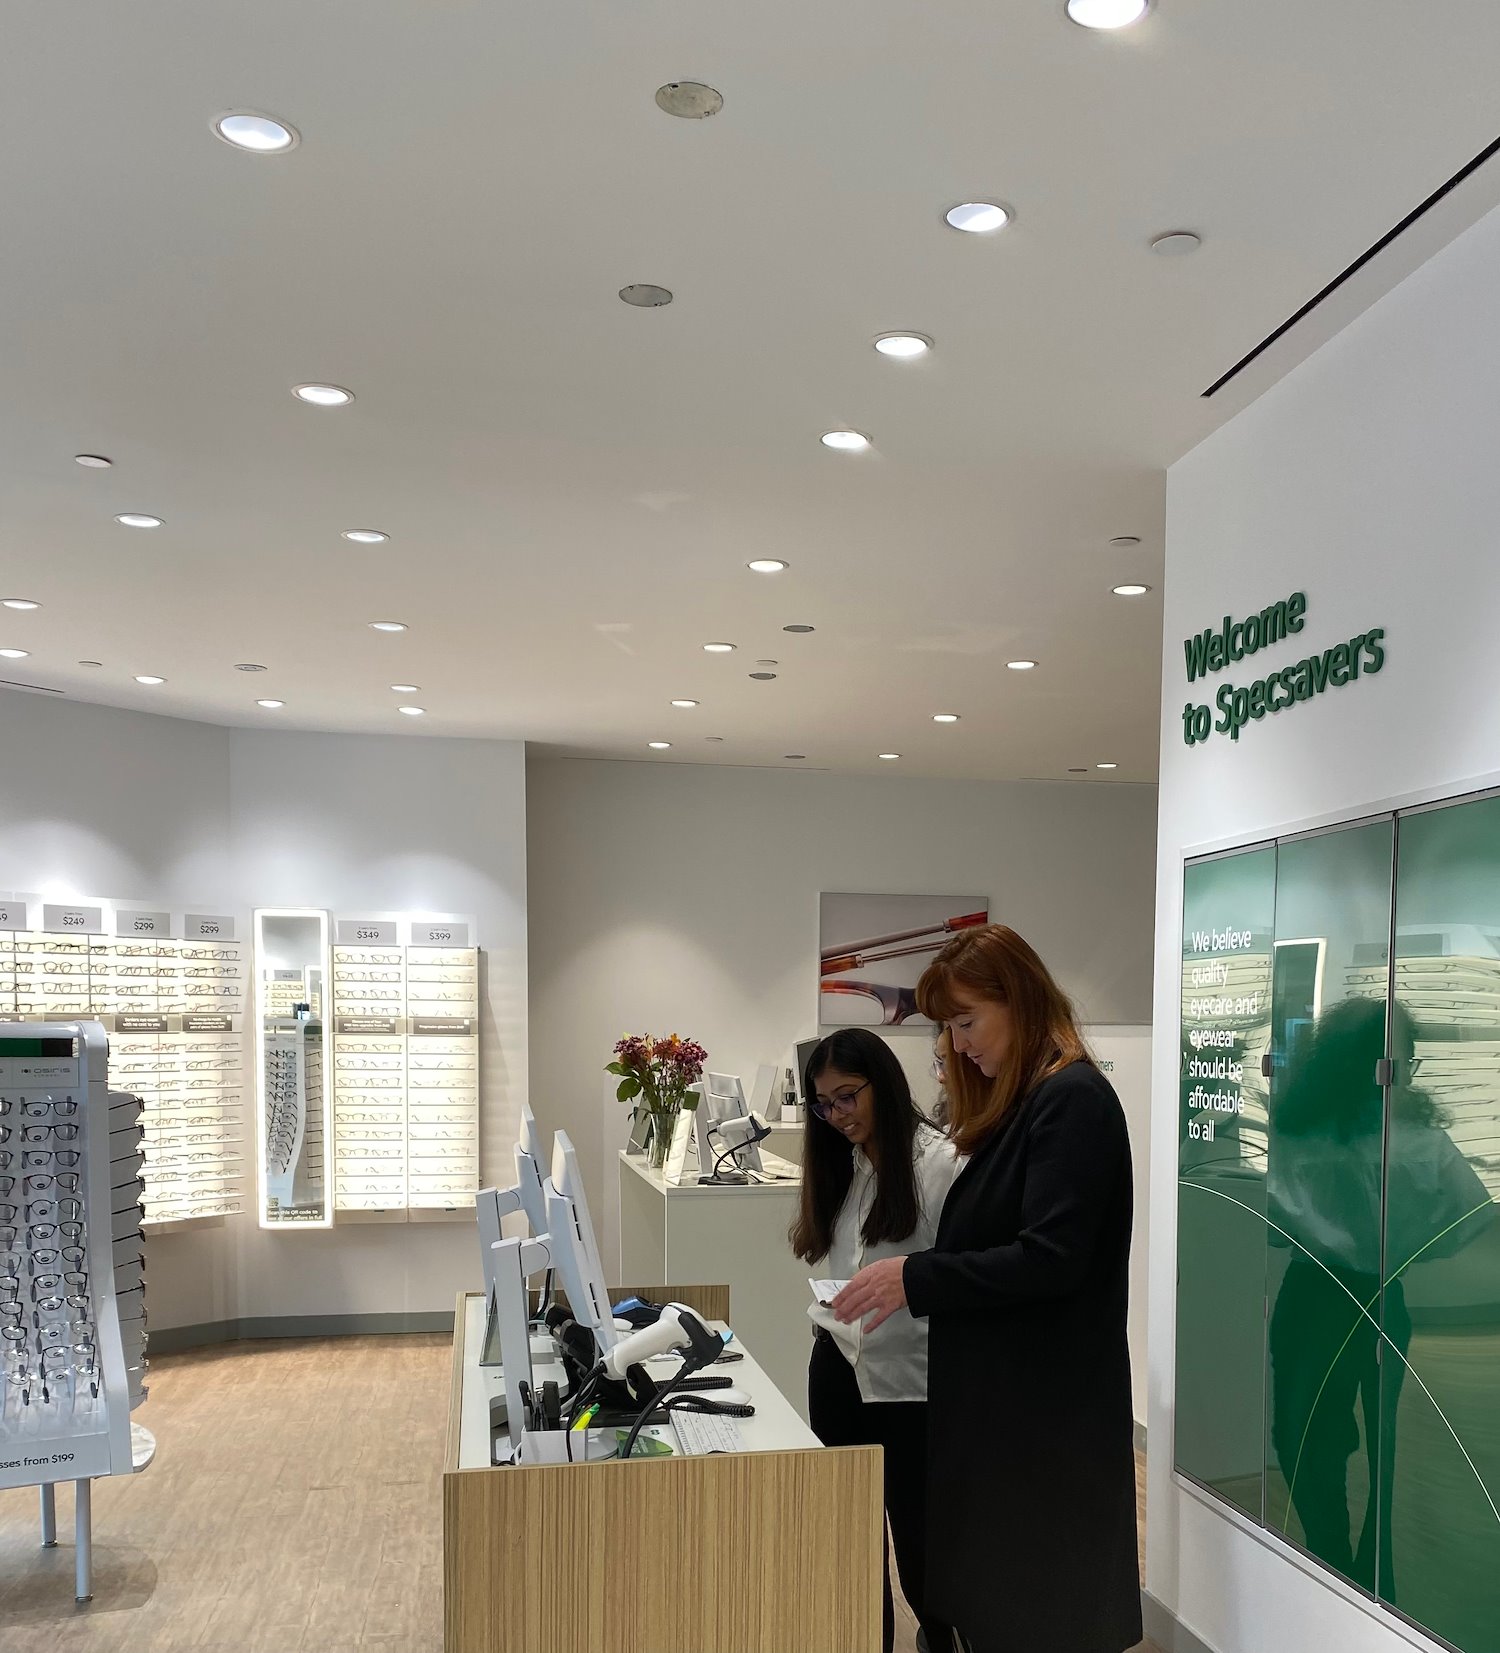 Images Specsavers Fairview Park Mall